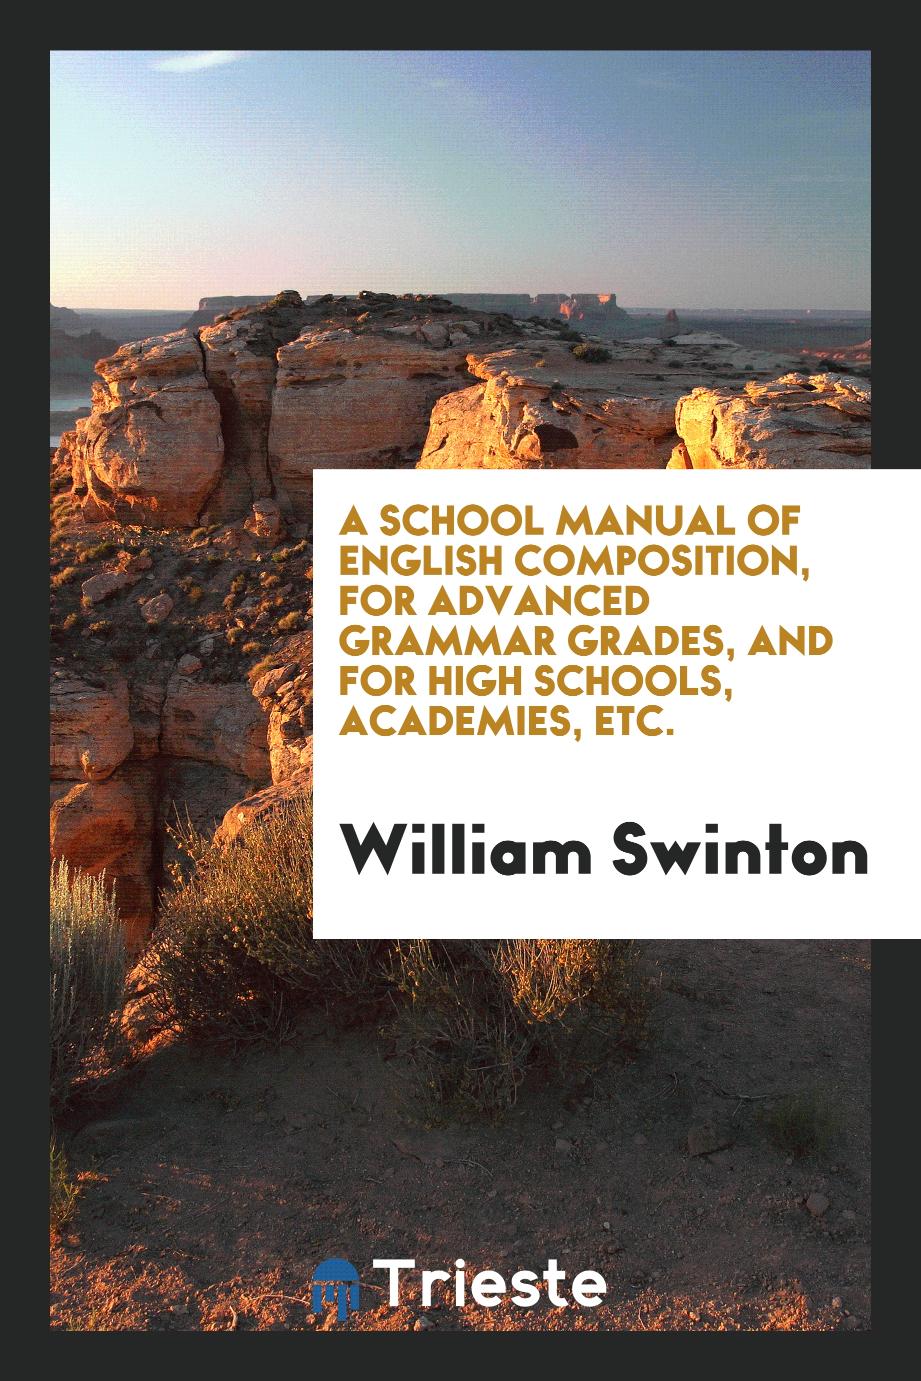 A School Manual of English Composition, for Advanced Grammar Grades, and for High Schools, Academies, Etc.